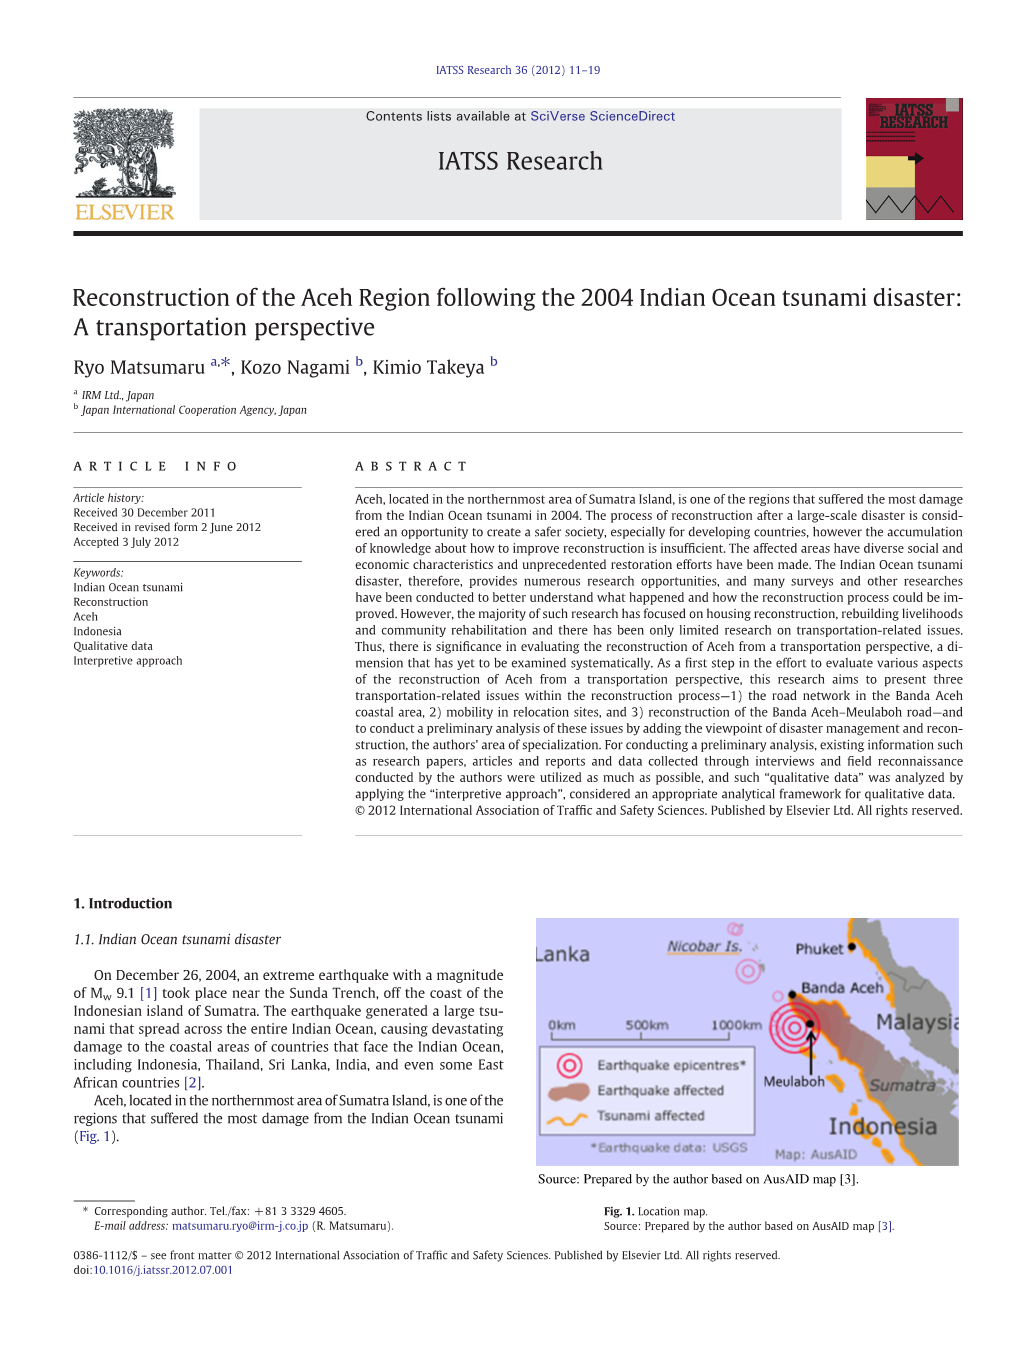 Reconstruction of the Aceh Region Following the 2004 Indian Ocean Tsunami Disaster: a Transportation Perspective